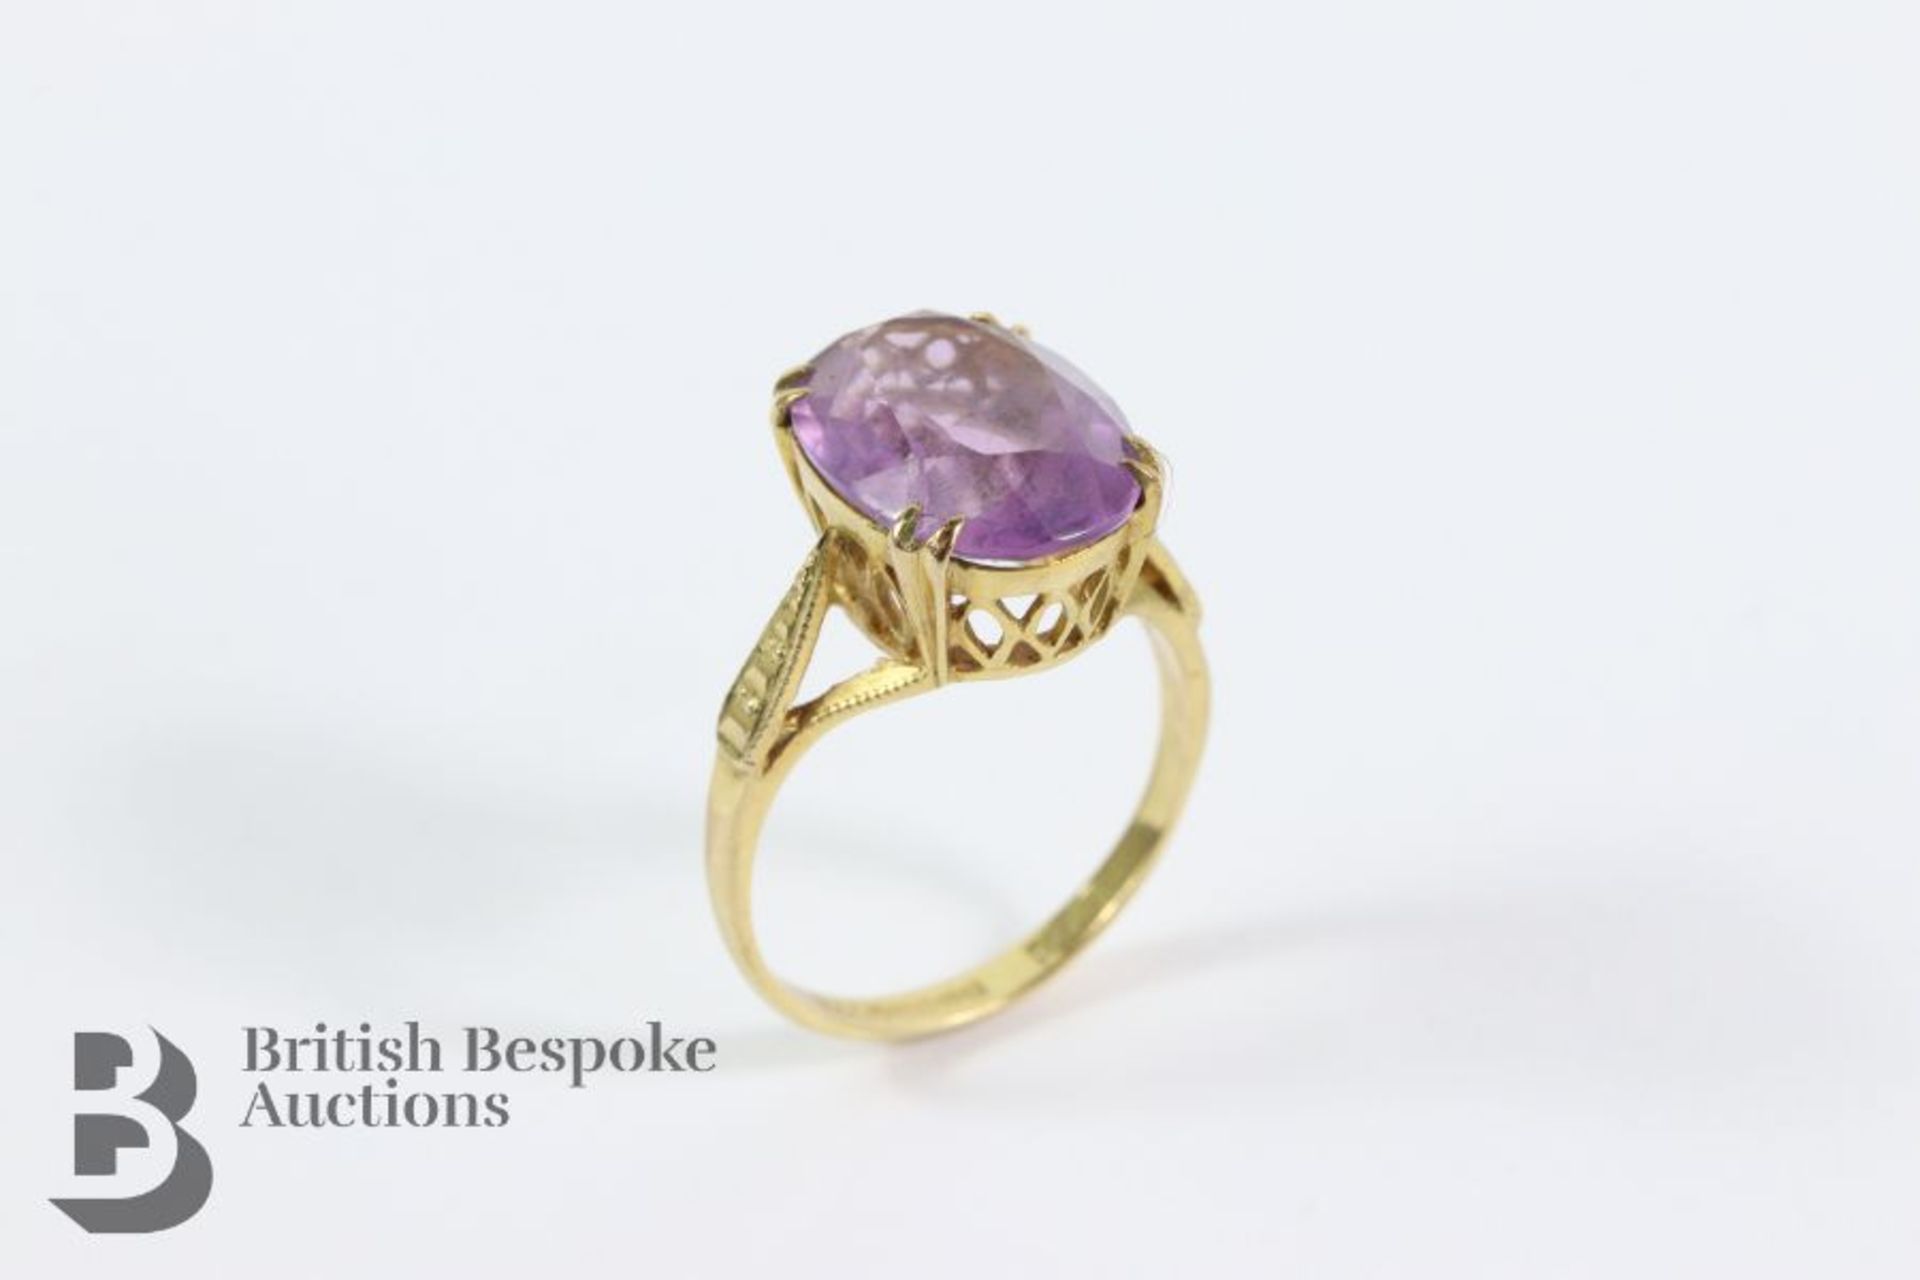 9ct Gold Amethyst Ring - Image 3 of 3